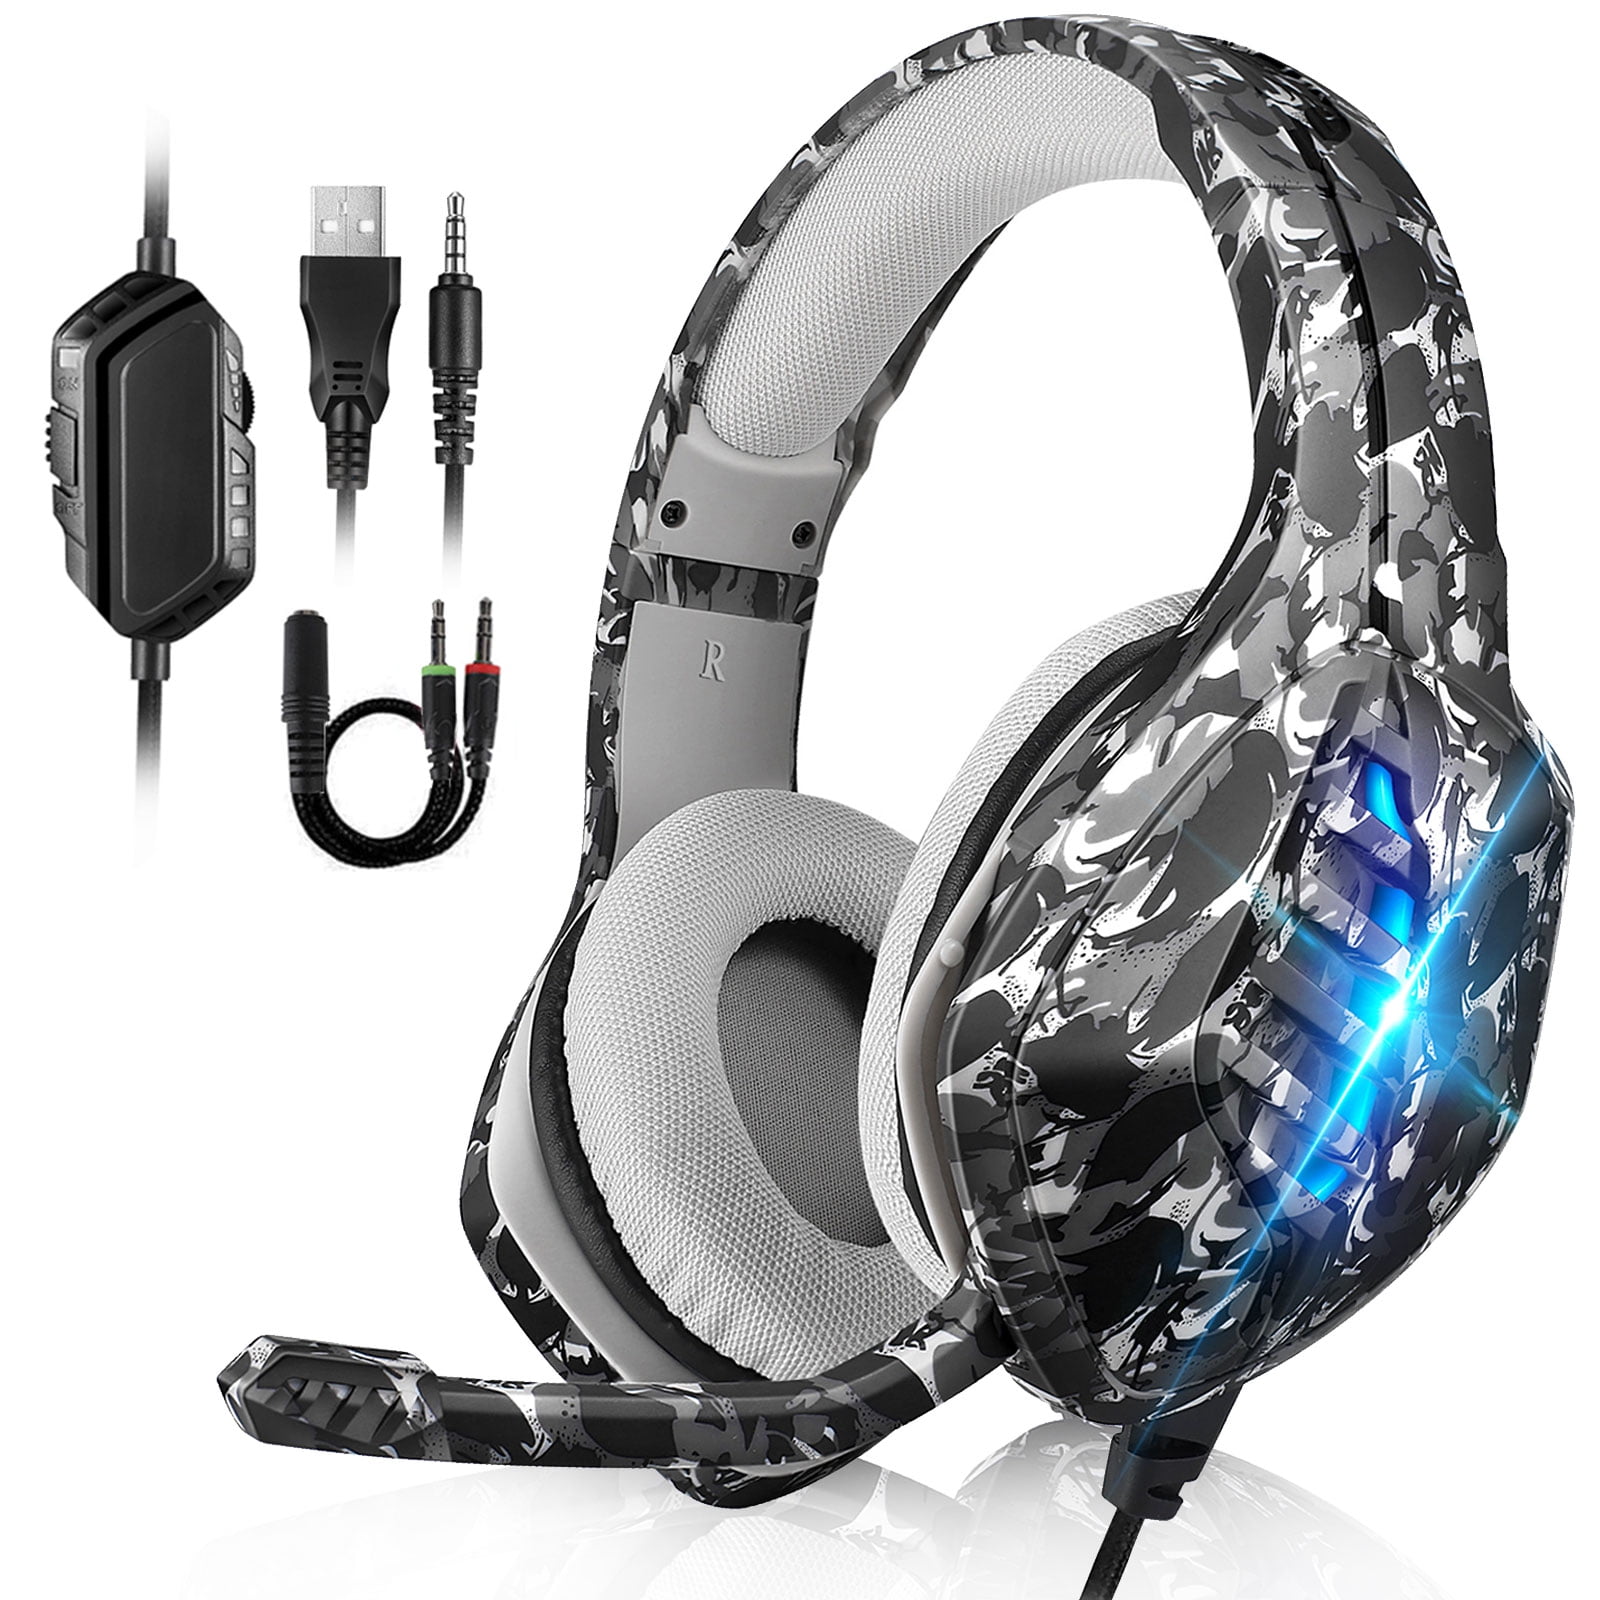 TSV Gaming Headset Fit for PC, PS4, PS5, Xbox One, Mac, Laptop ...